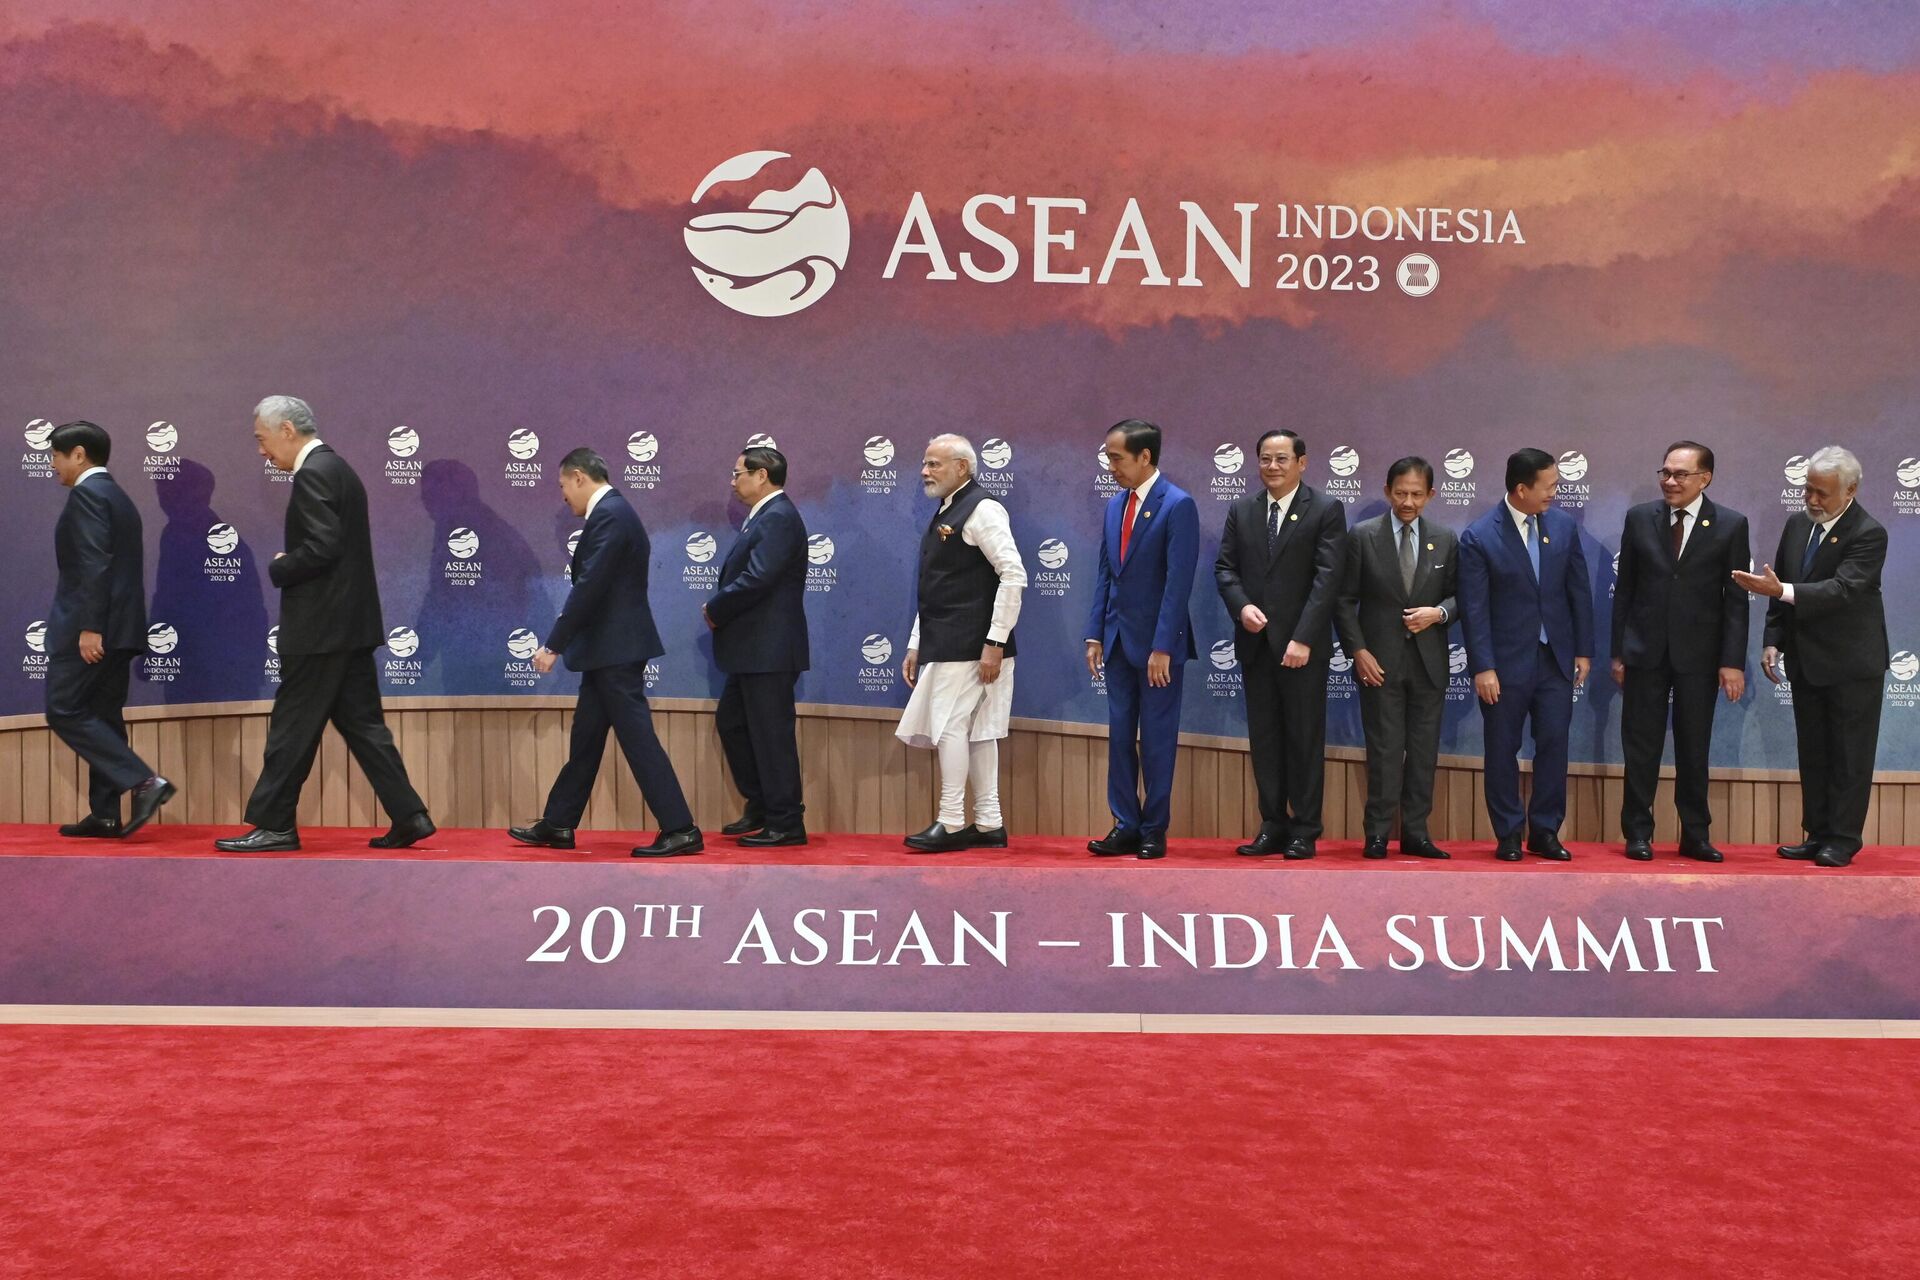 Leaders and delegate members attend the 20th ASEAN-India Summit in Jakarta, Indonesia, Sept. 6, 2023. - Sputnik India, 1920, 19.09.2023